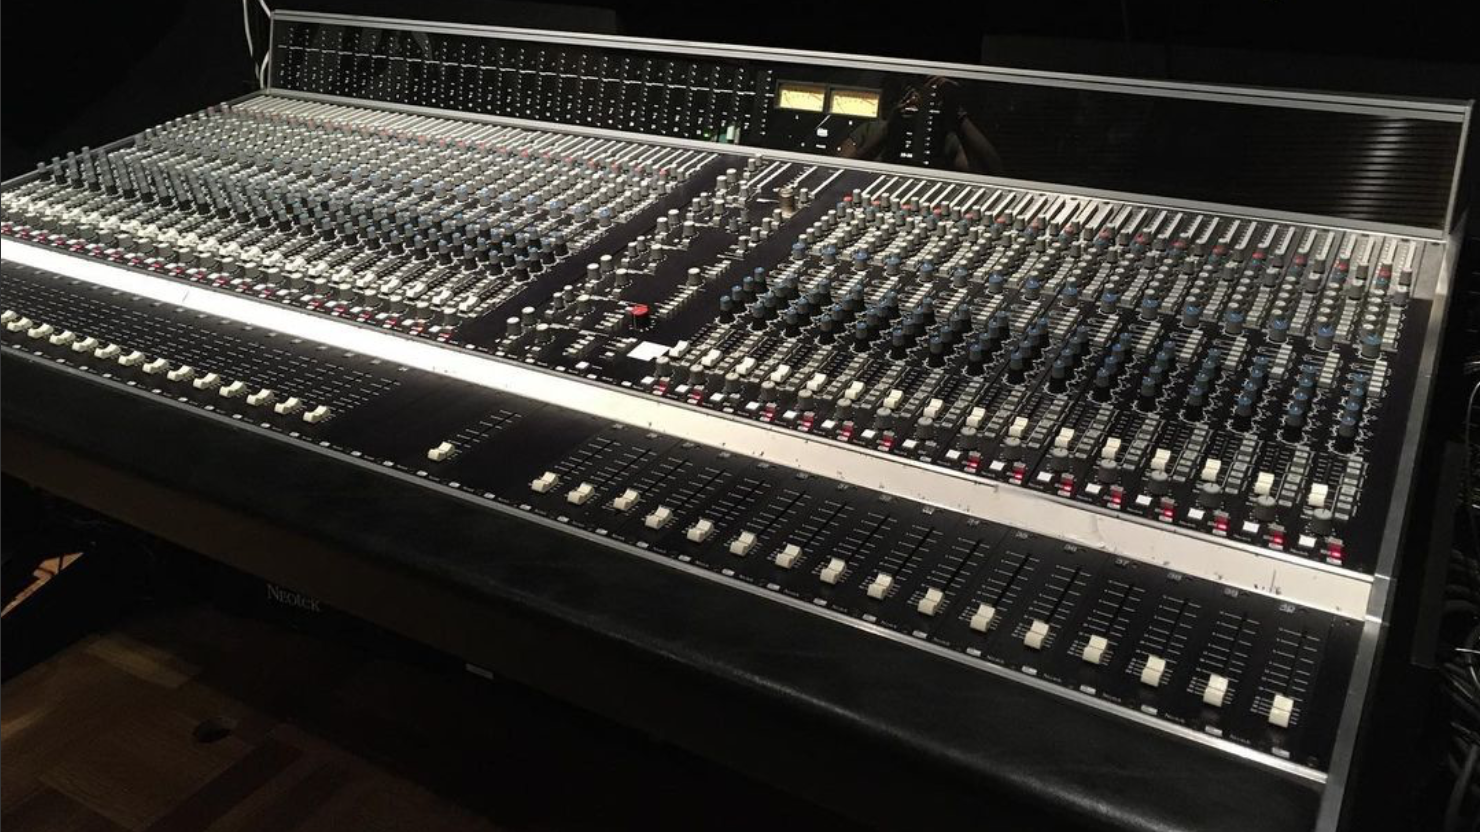 Newest Member of the Realgrey Arsenal - Neotek Elite Mixing Console